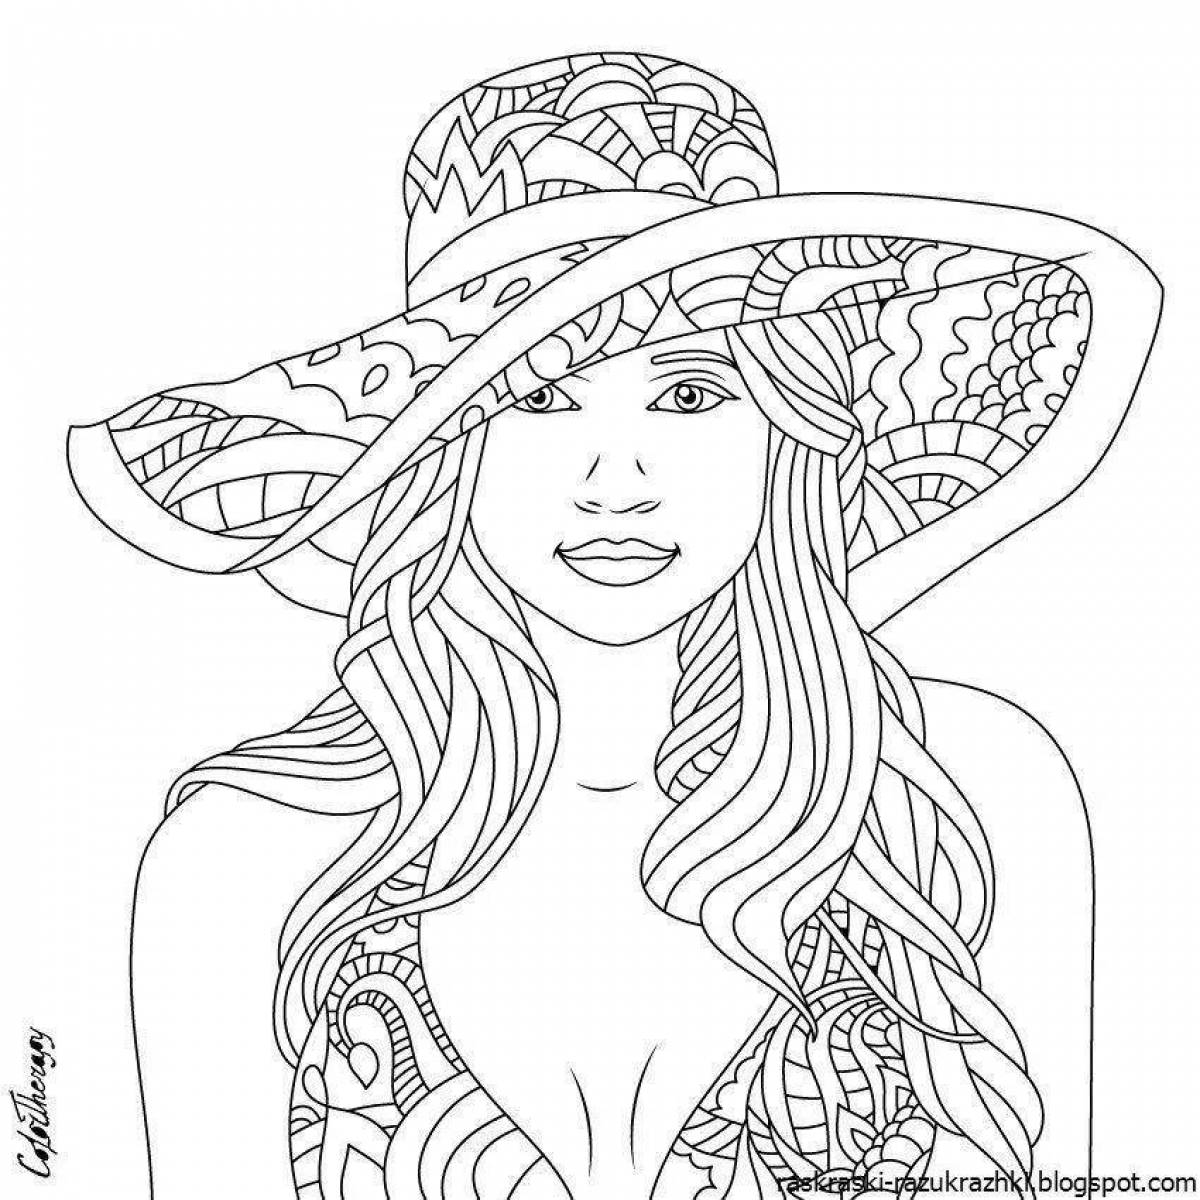 Charming lady coloring book